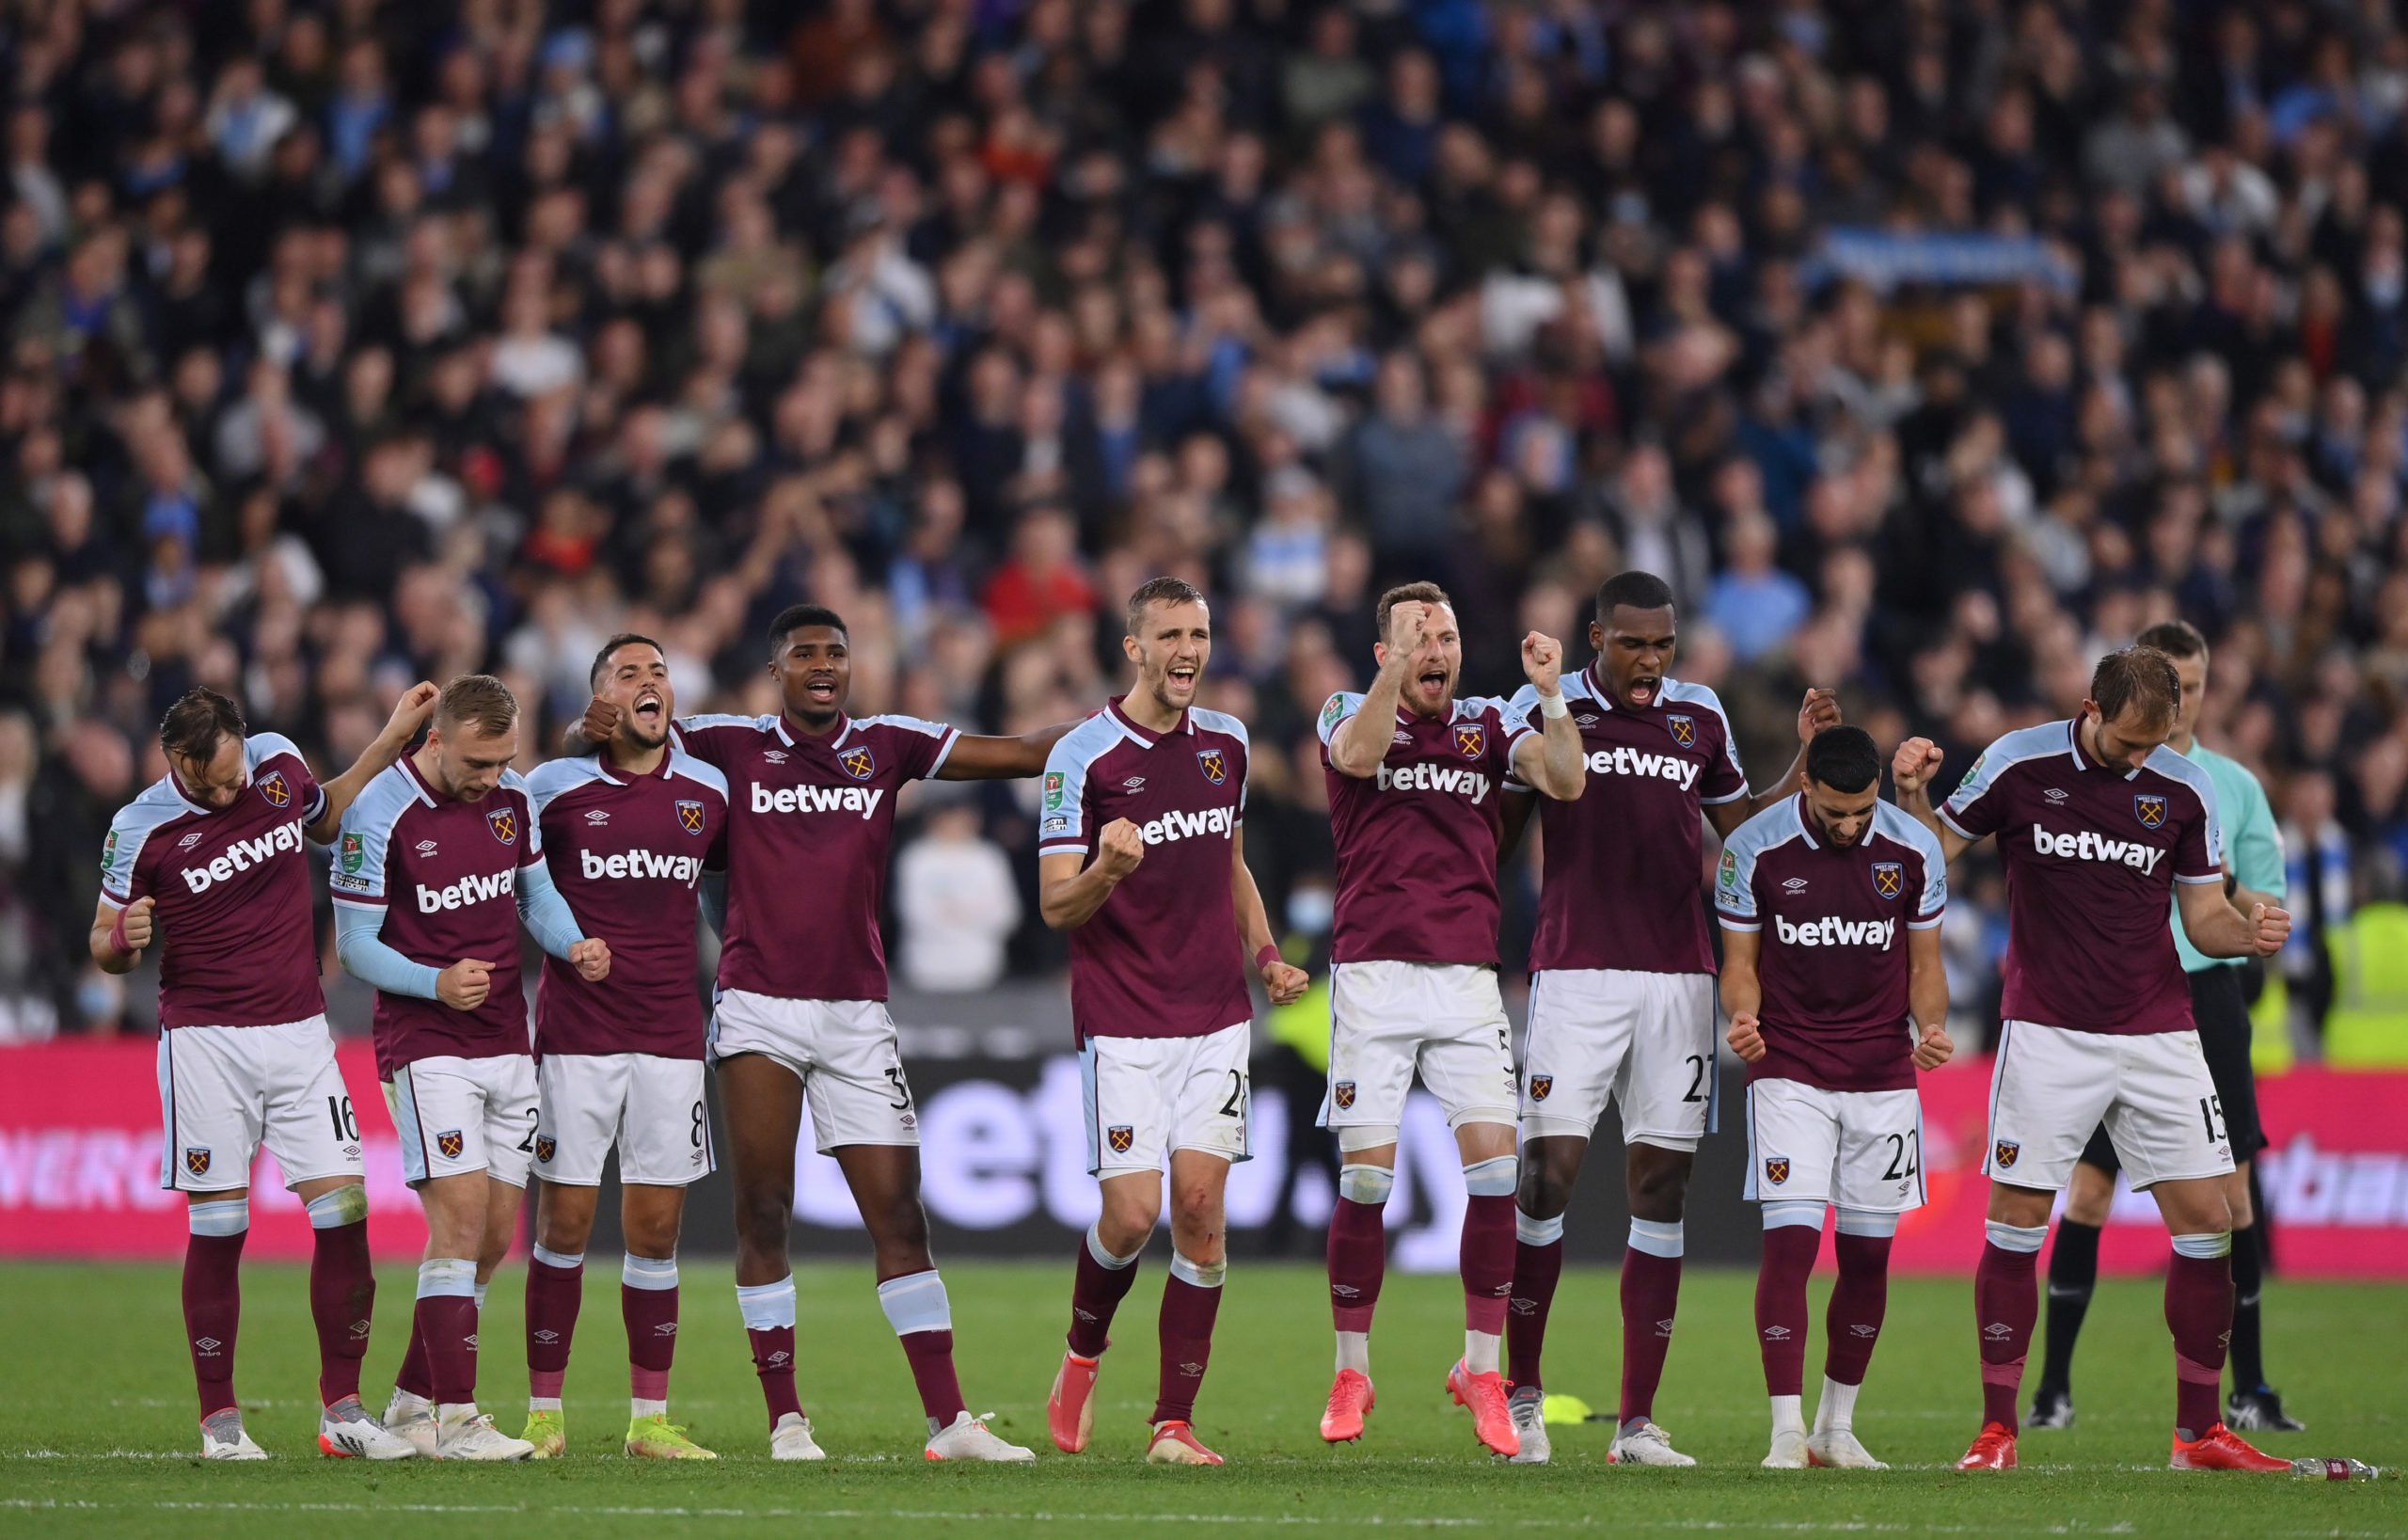 LONDON, ENGLAND - OCTOBER 27: West Ham United players react after a missed penalty from Manchester City during the penalty shootout in the Carabao Cup Round of 16 match between West Ham United and Manchester City at London Stadium on October 27, 2021 in London, England. (Photo by Justin Setterfield/Getty Images)The 4th Official uses images provided by the following image agency: Getty Images (https://www.gettyimages.de/) Imago Images (https://www.imago-images.de/)